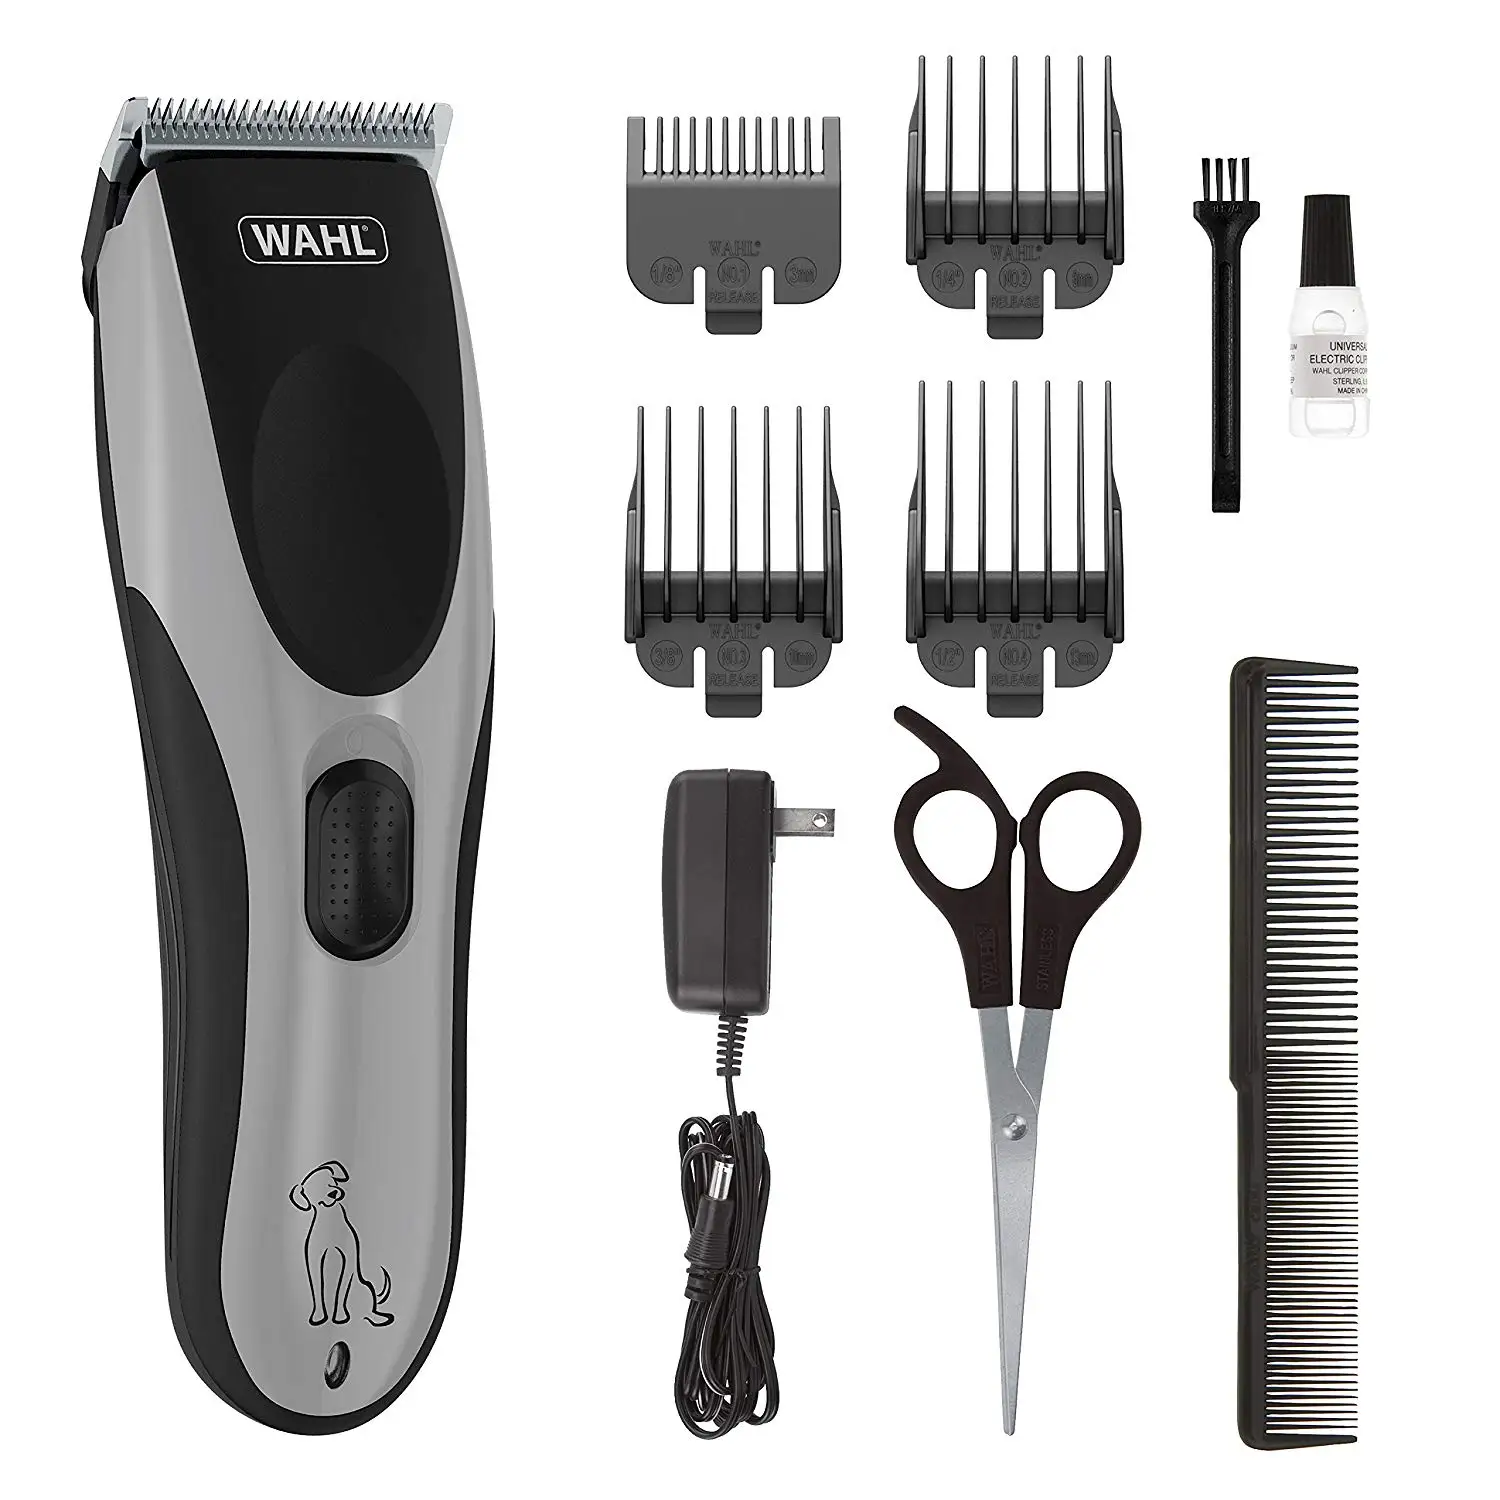 wahl cordless dog grooming clippers